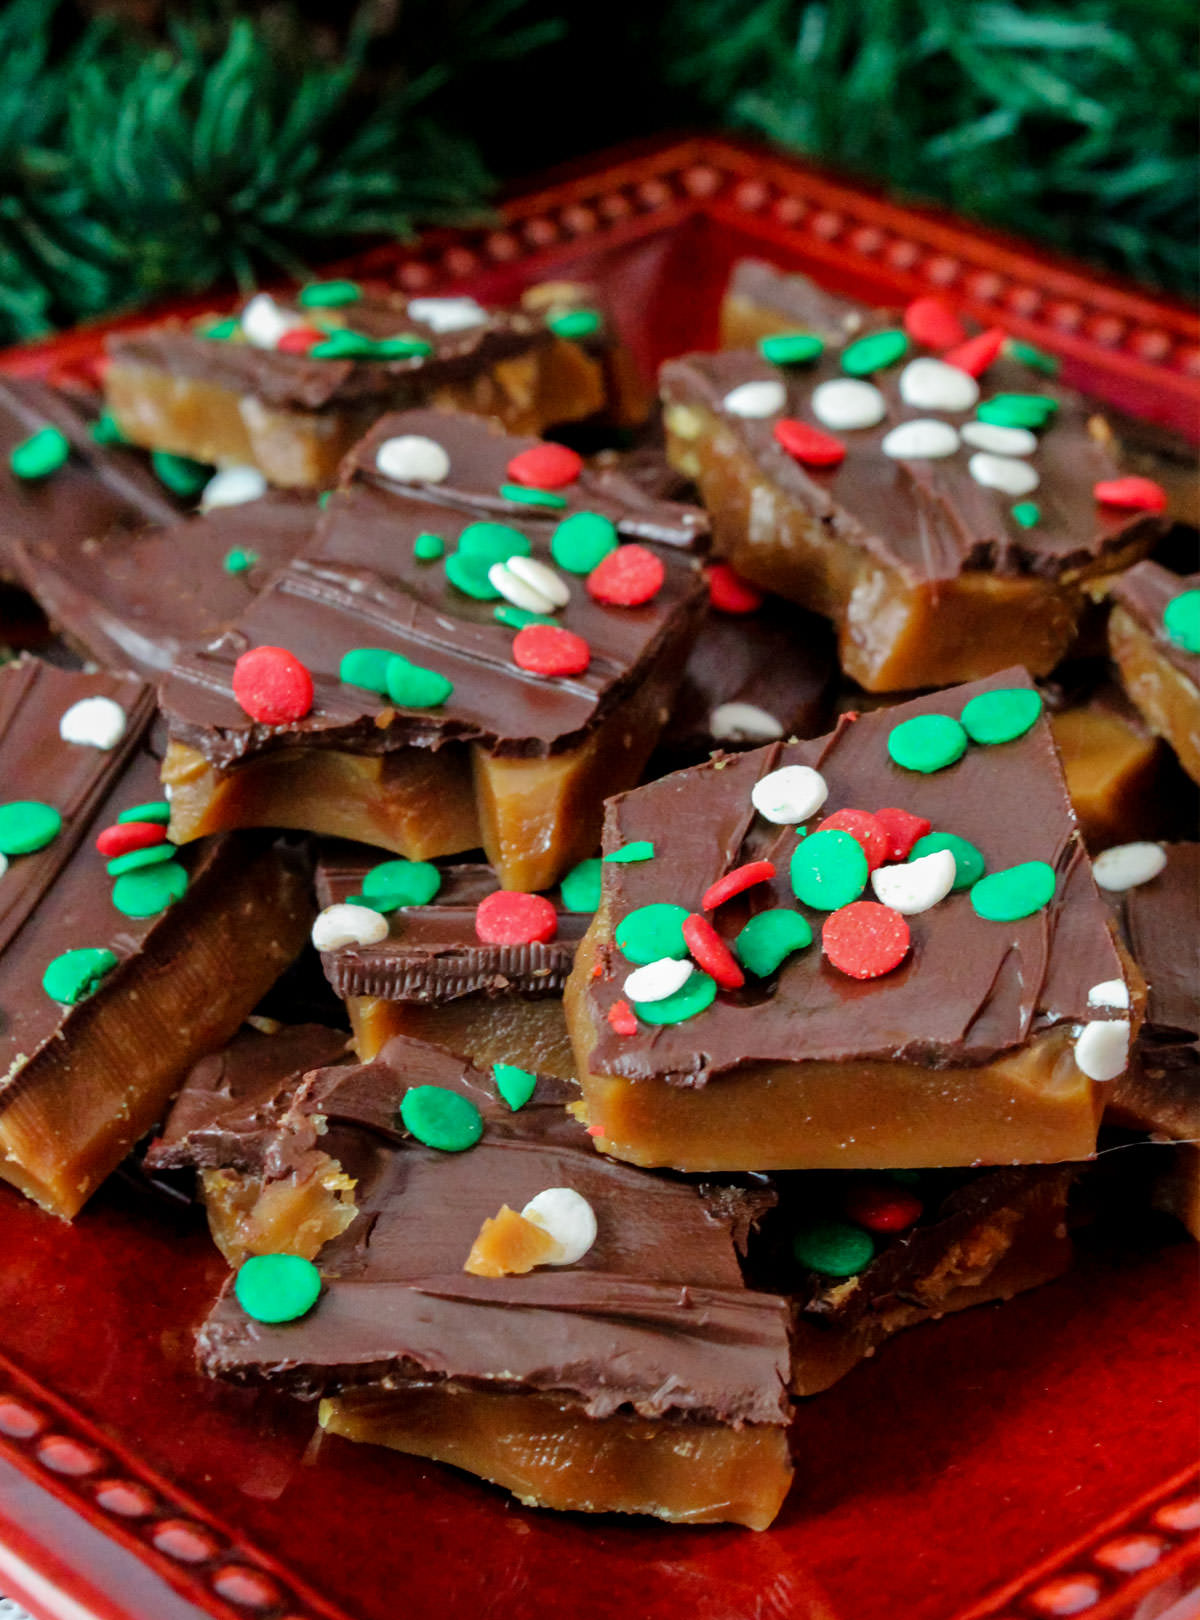 Closeup on a batch of Homemade English Toffee sitting on a red plate surrounded by Christmas decorations.